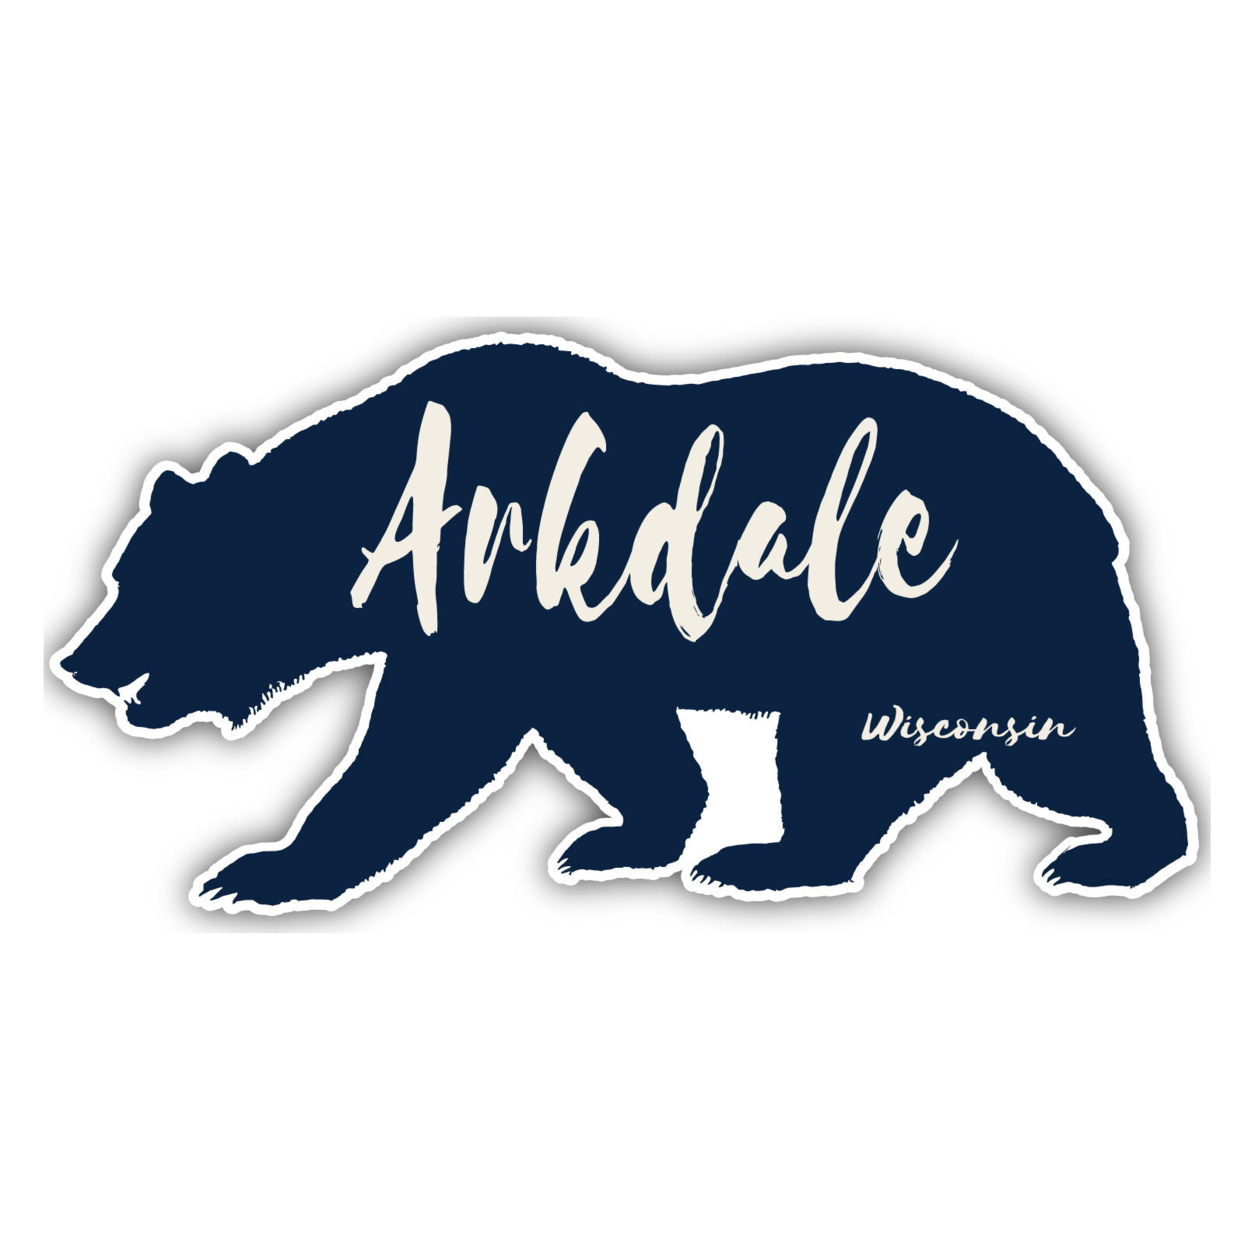 Arkdale Wisconsin Souvenir Decorative Stickers (Choose Theme And Size) - 4-Pack, 6-Inch, Bear